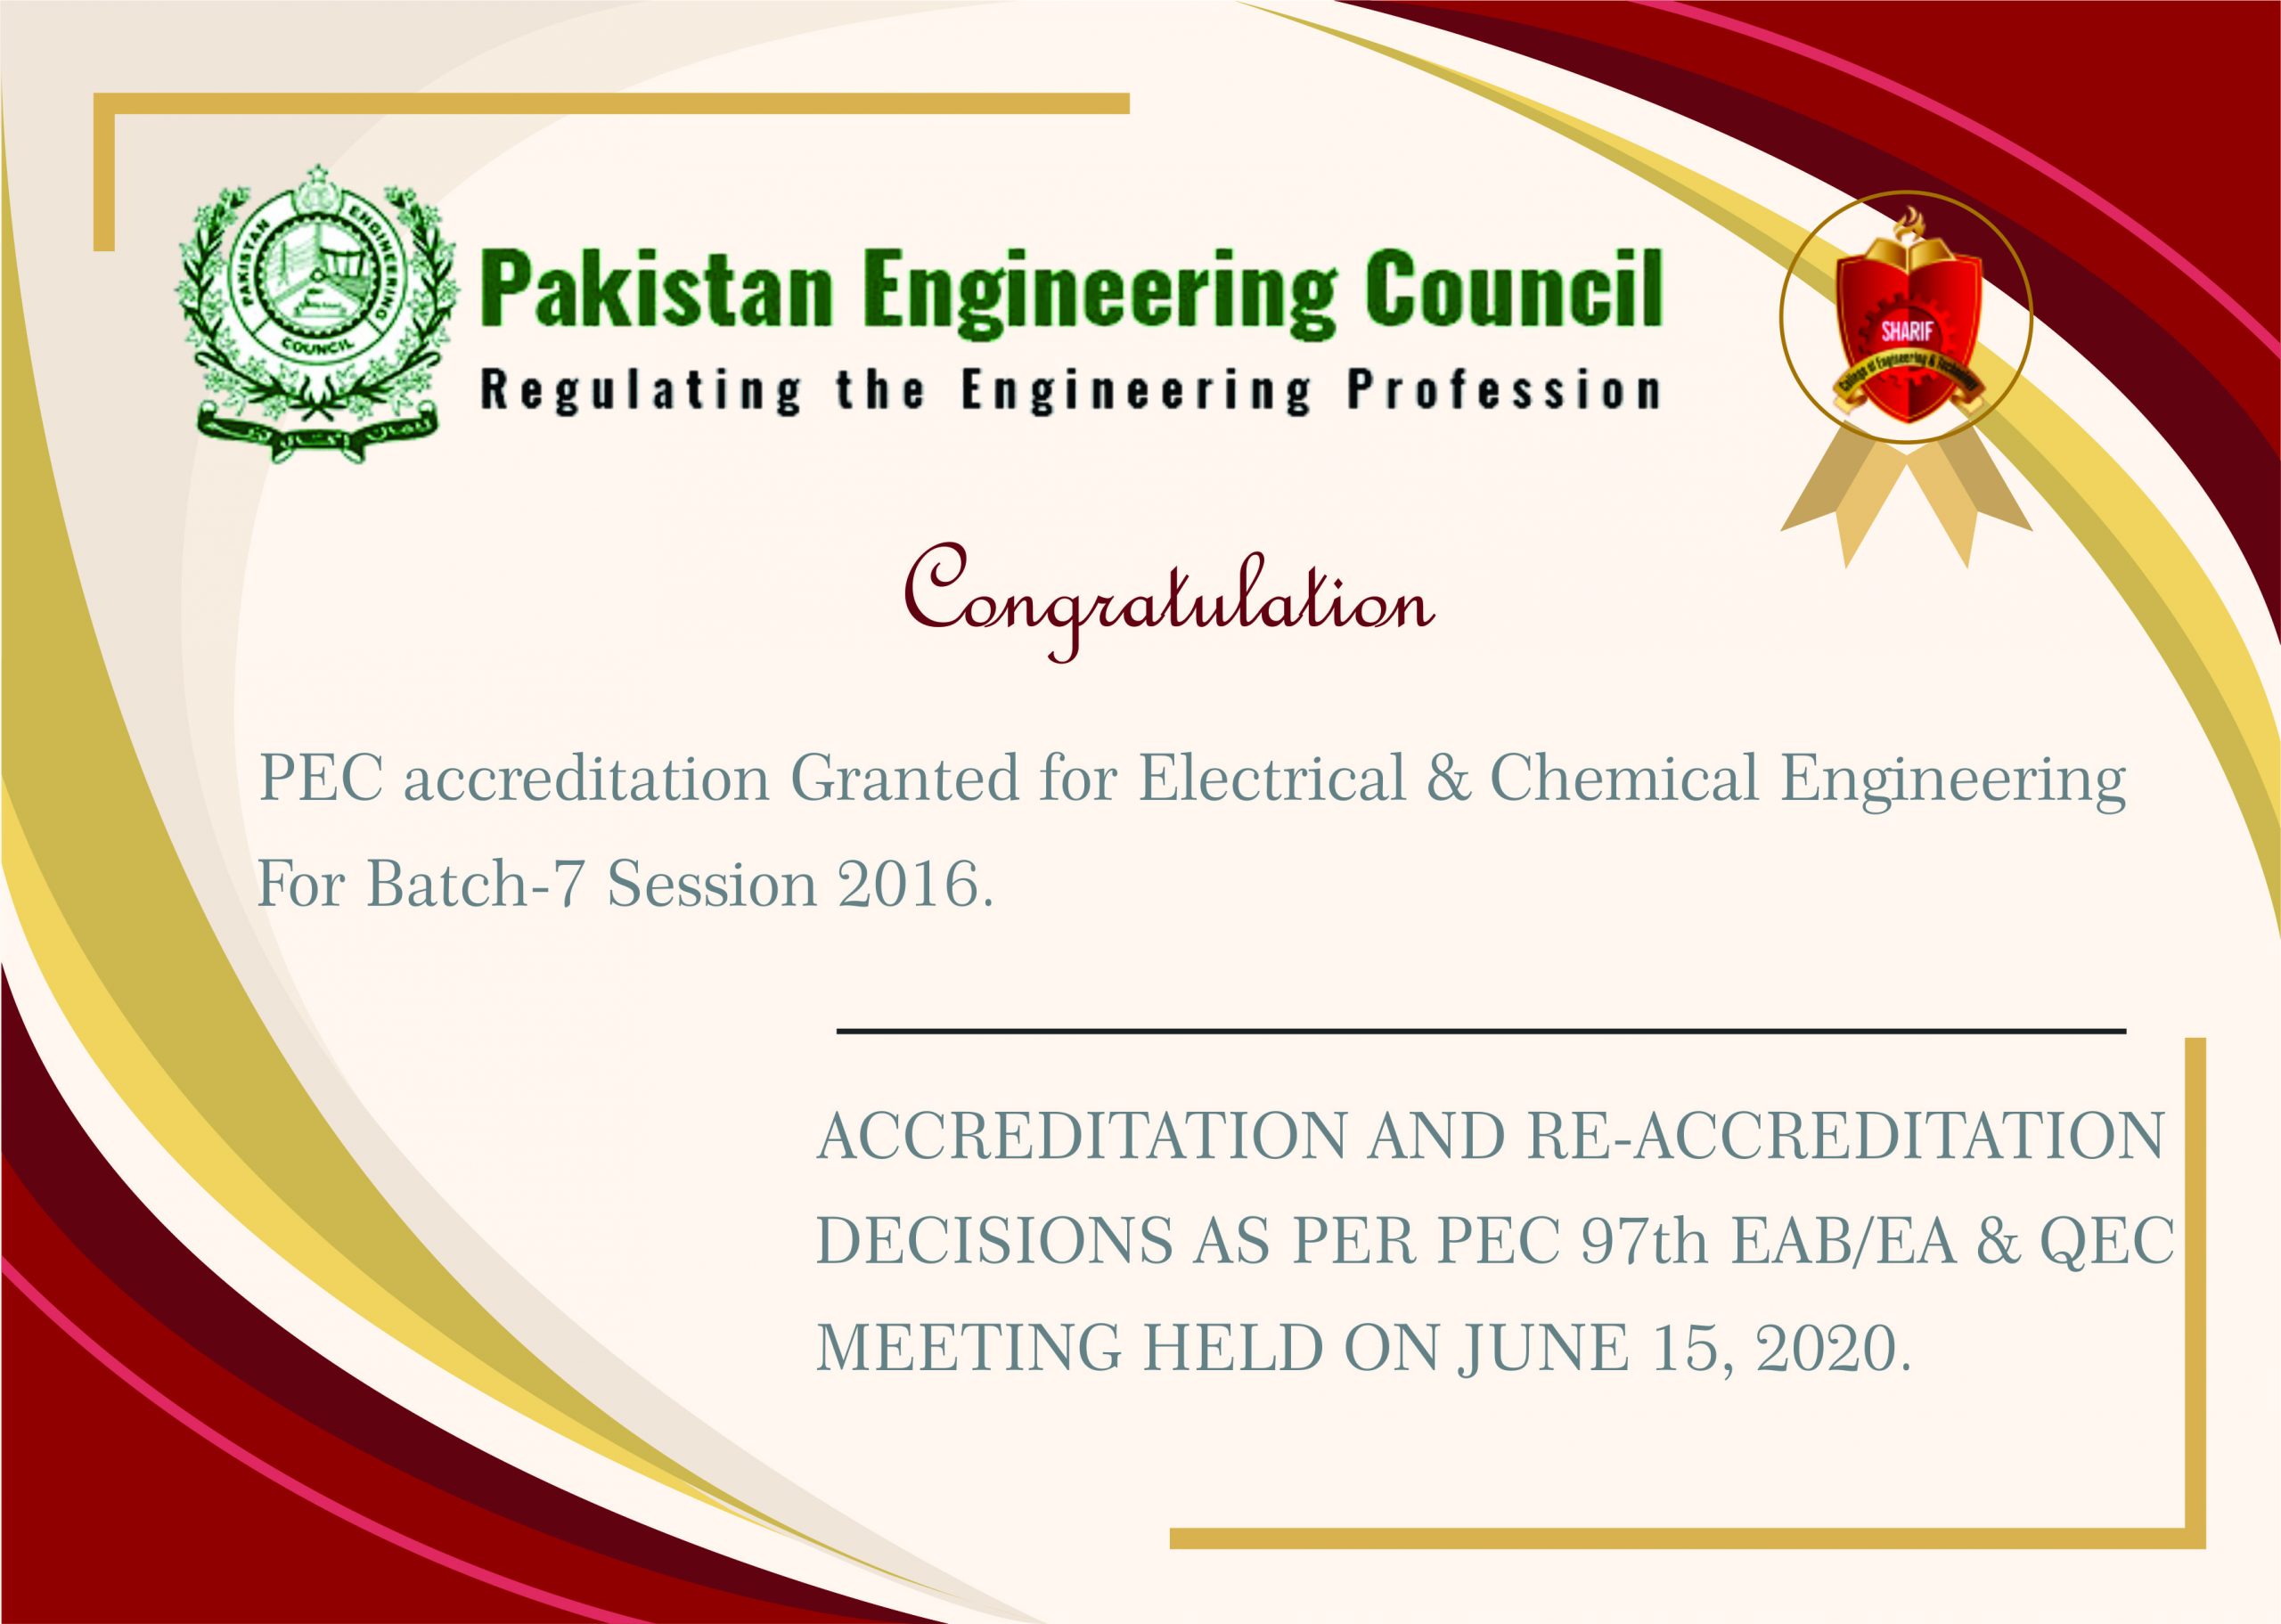 PEC accreditation Granted for Electrical & Chemical Engineering